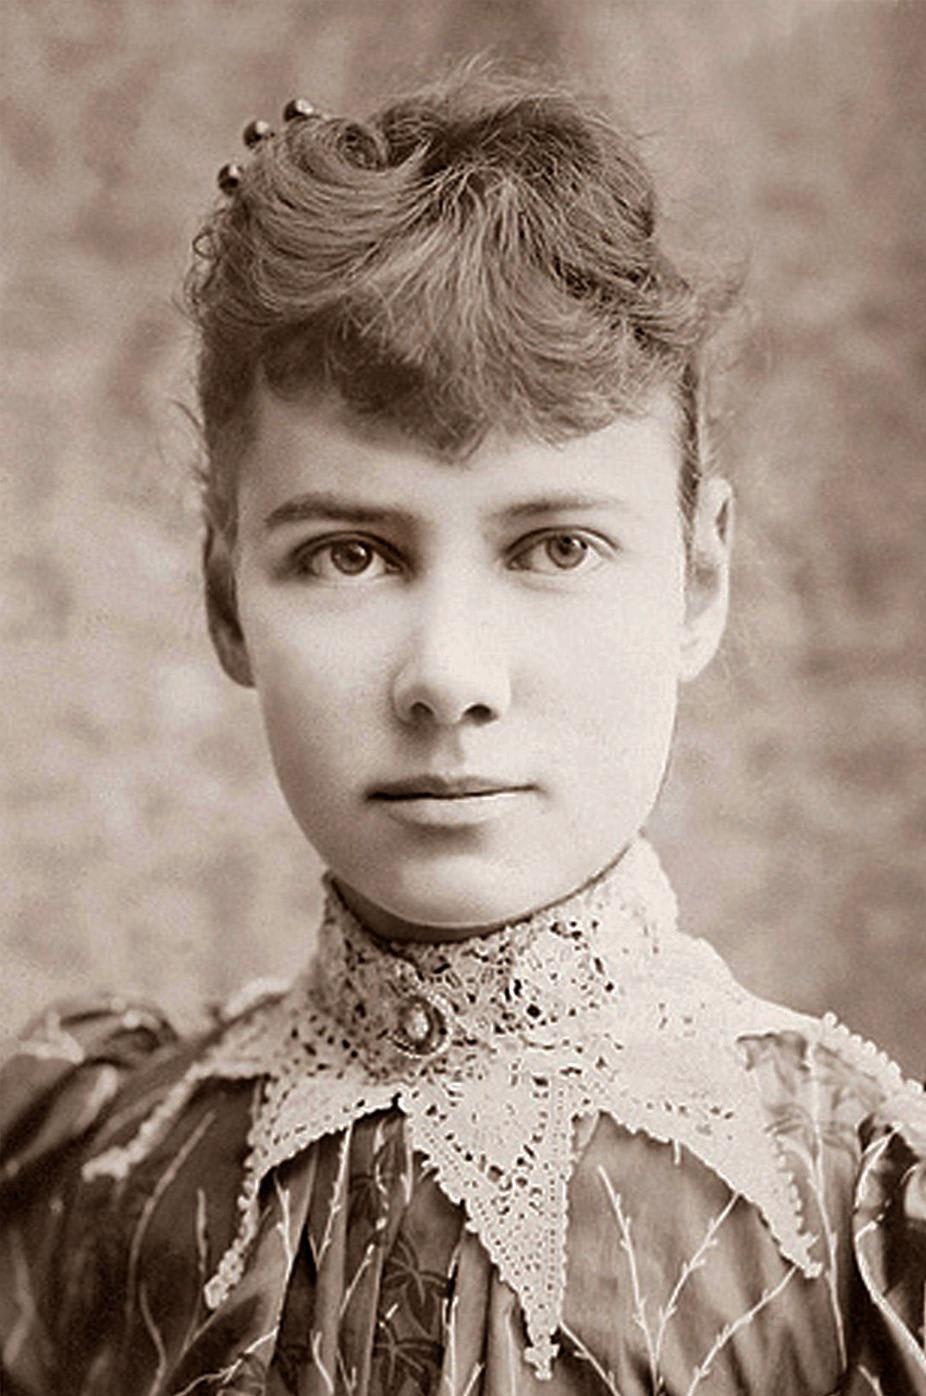 Nellie Bly went undercover in an insane asylum in 1887 for 10 days and uncovered the wrongdoing of the insane asylum. In 1889 she broke the record for fastest time to travel around the world at 72 days. She also patented inventions for oil manufacturing and some are still used today.